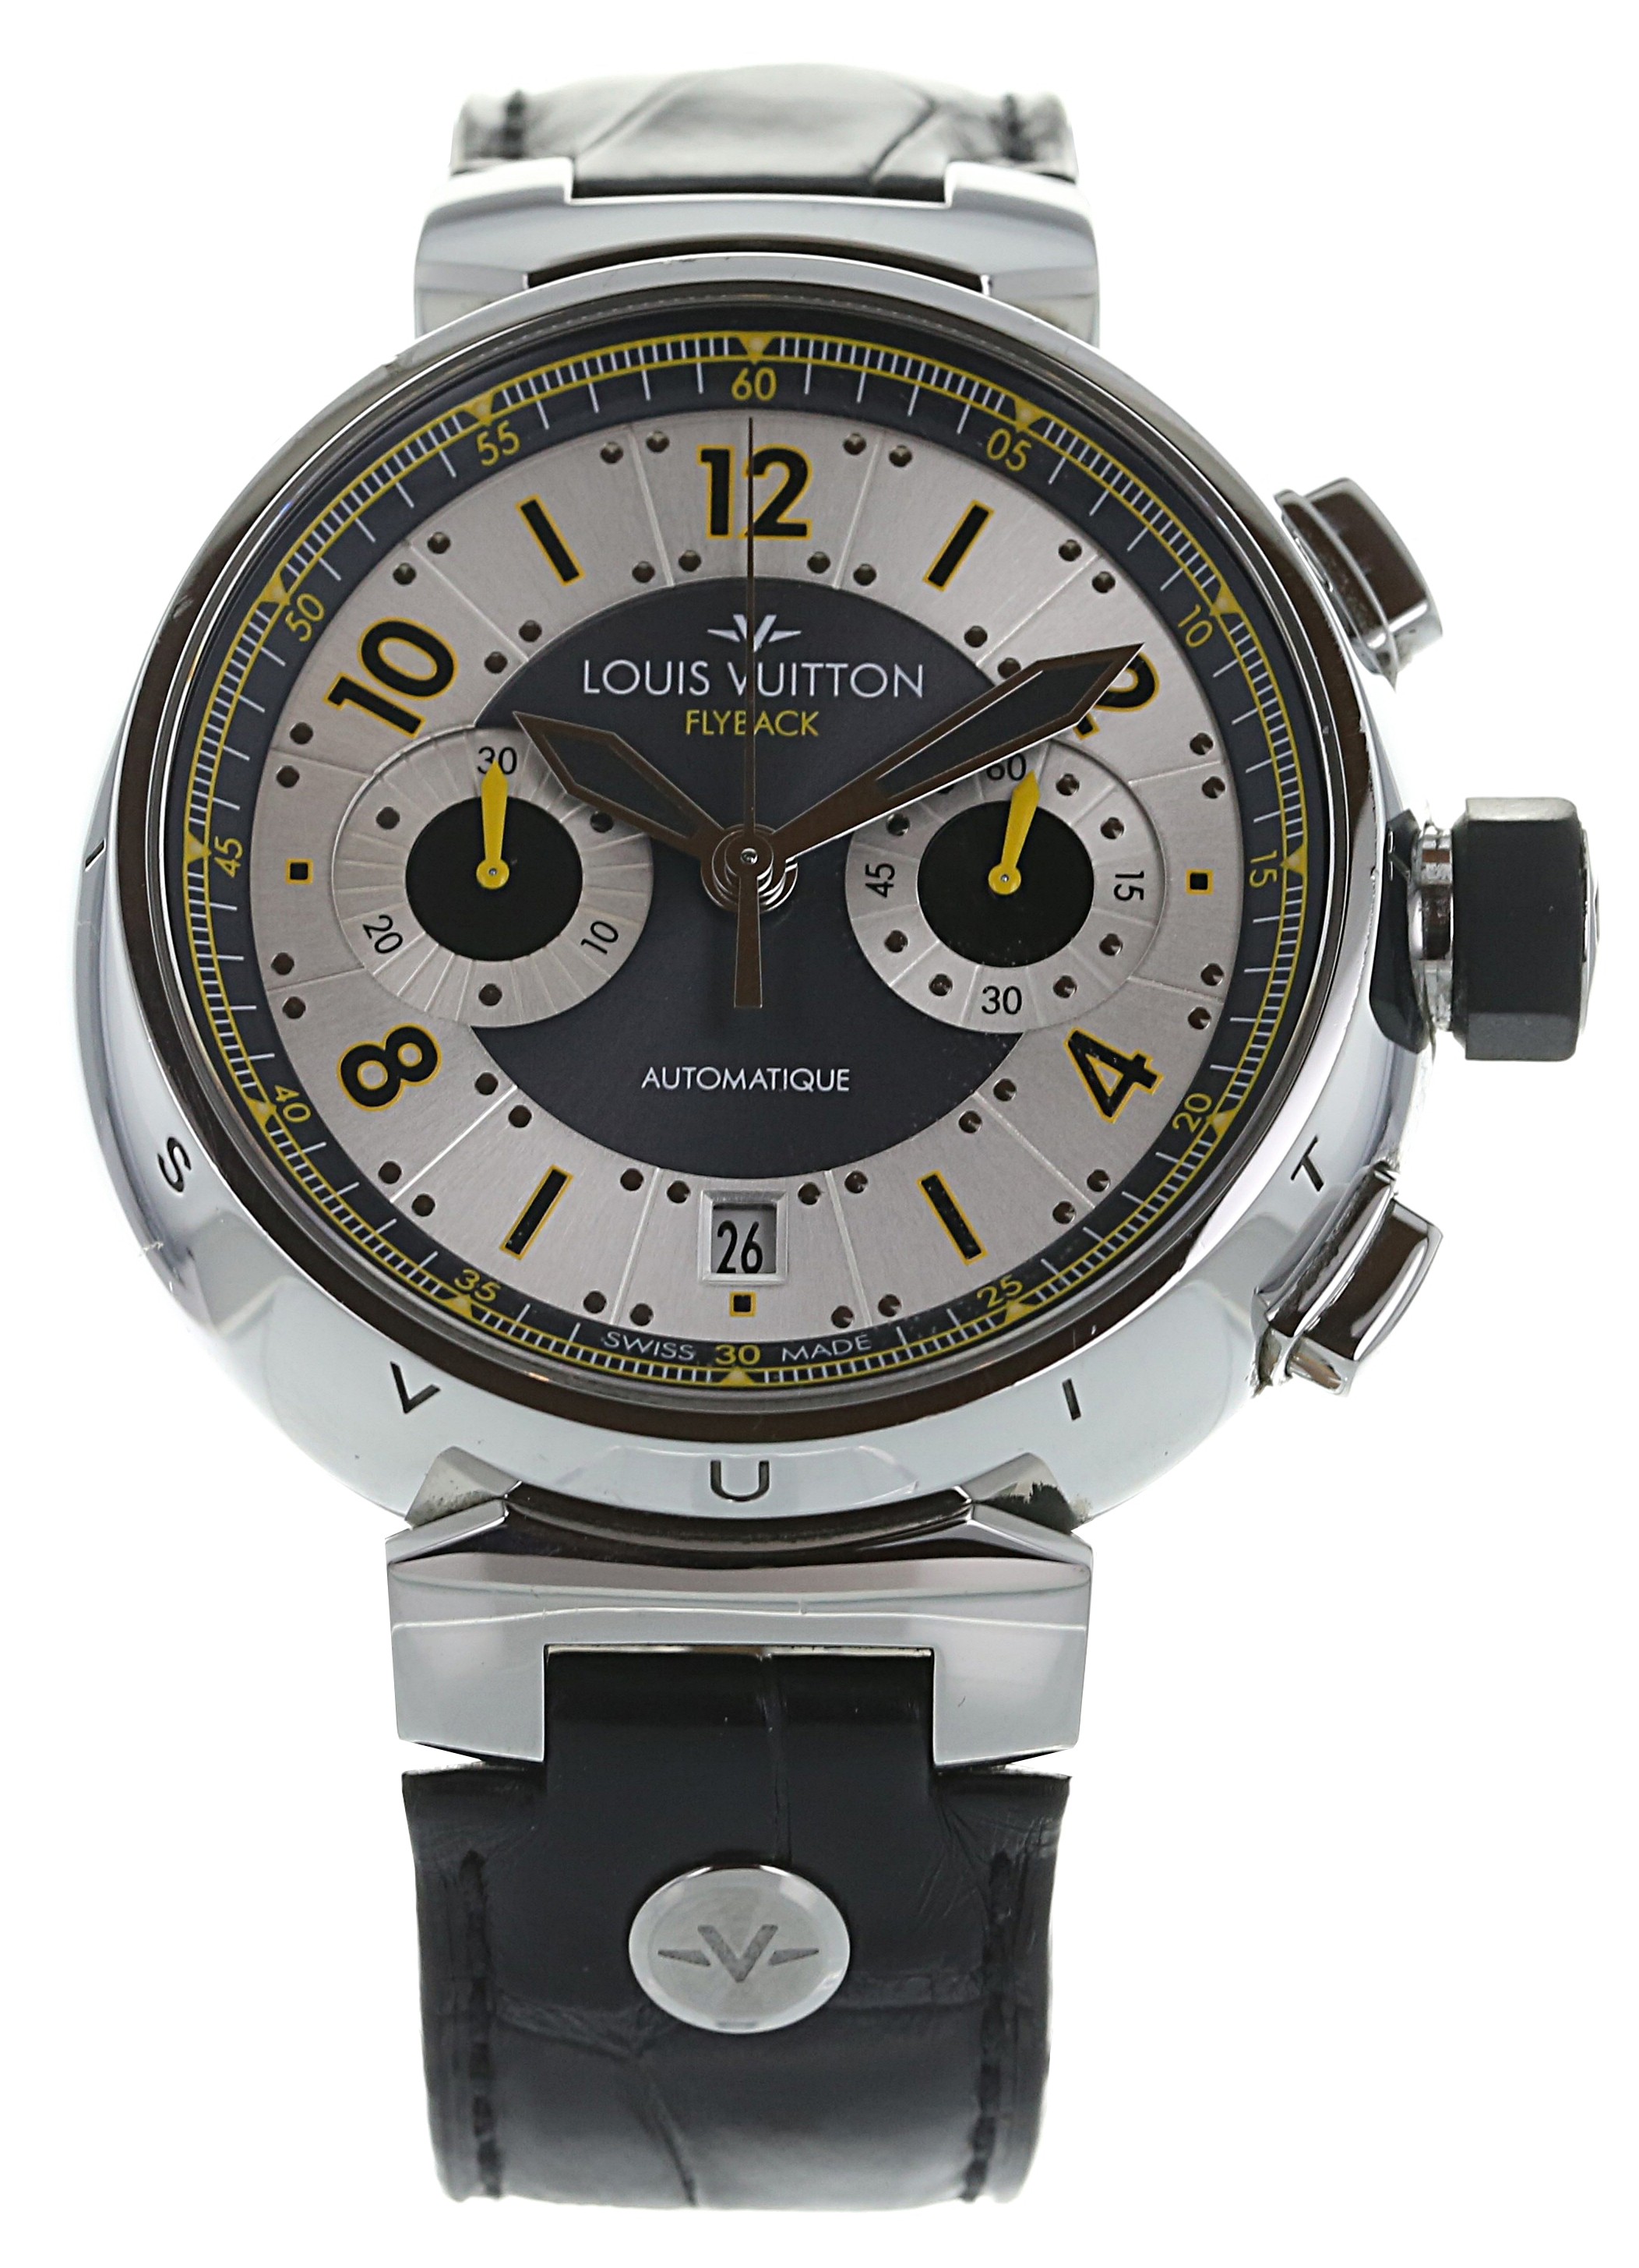 Louis Vuitton Tambour Flyback Chronograph for $4,077 for sale from a Seller  on Chrono24